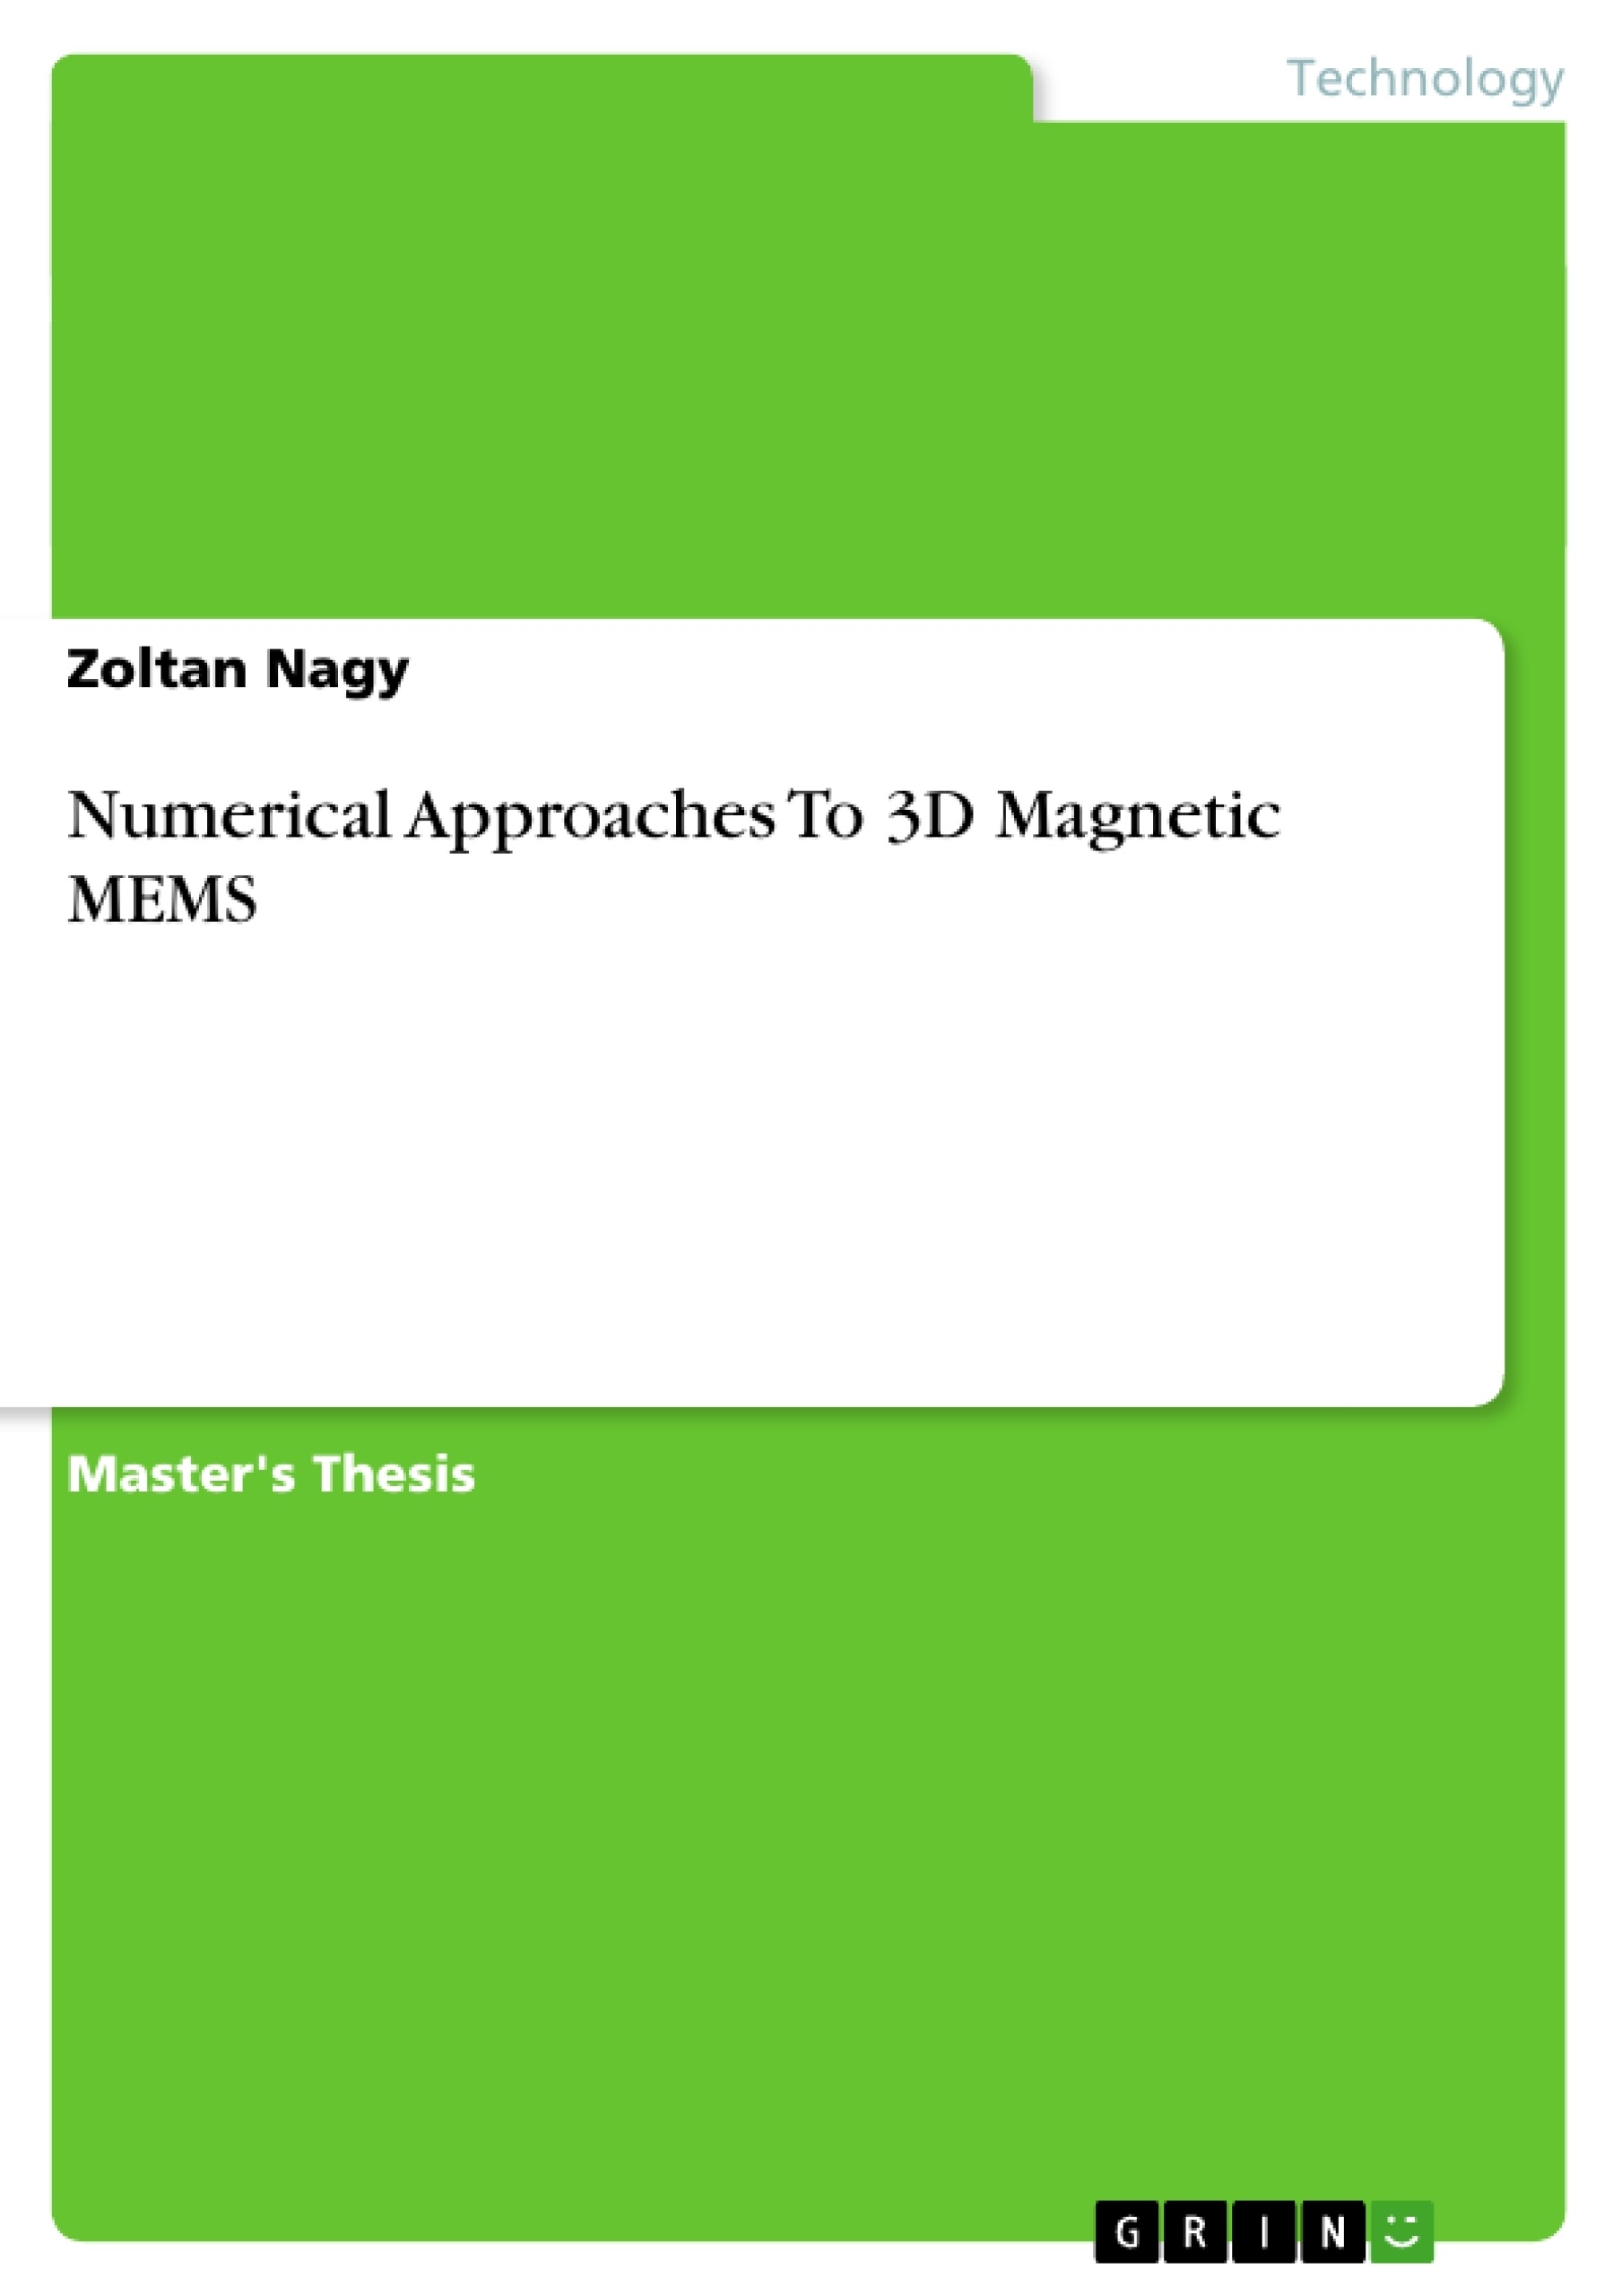 Titre: Numerical Approaches To 3D Magnetic MEMS